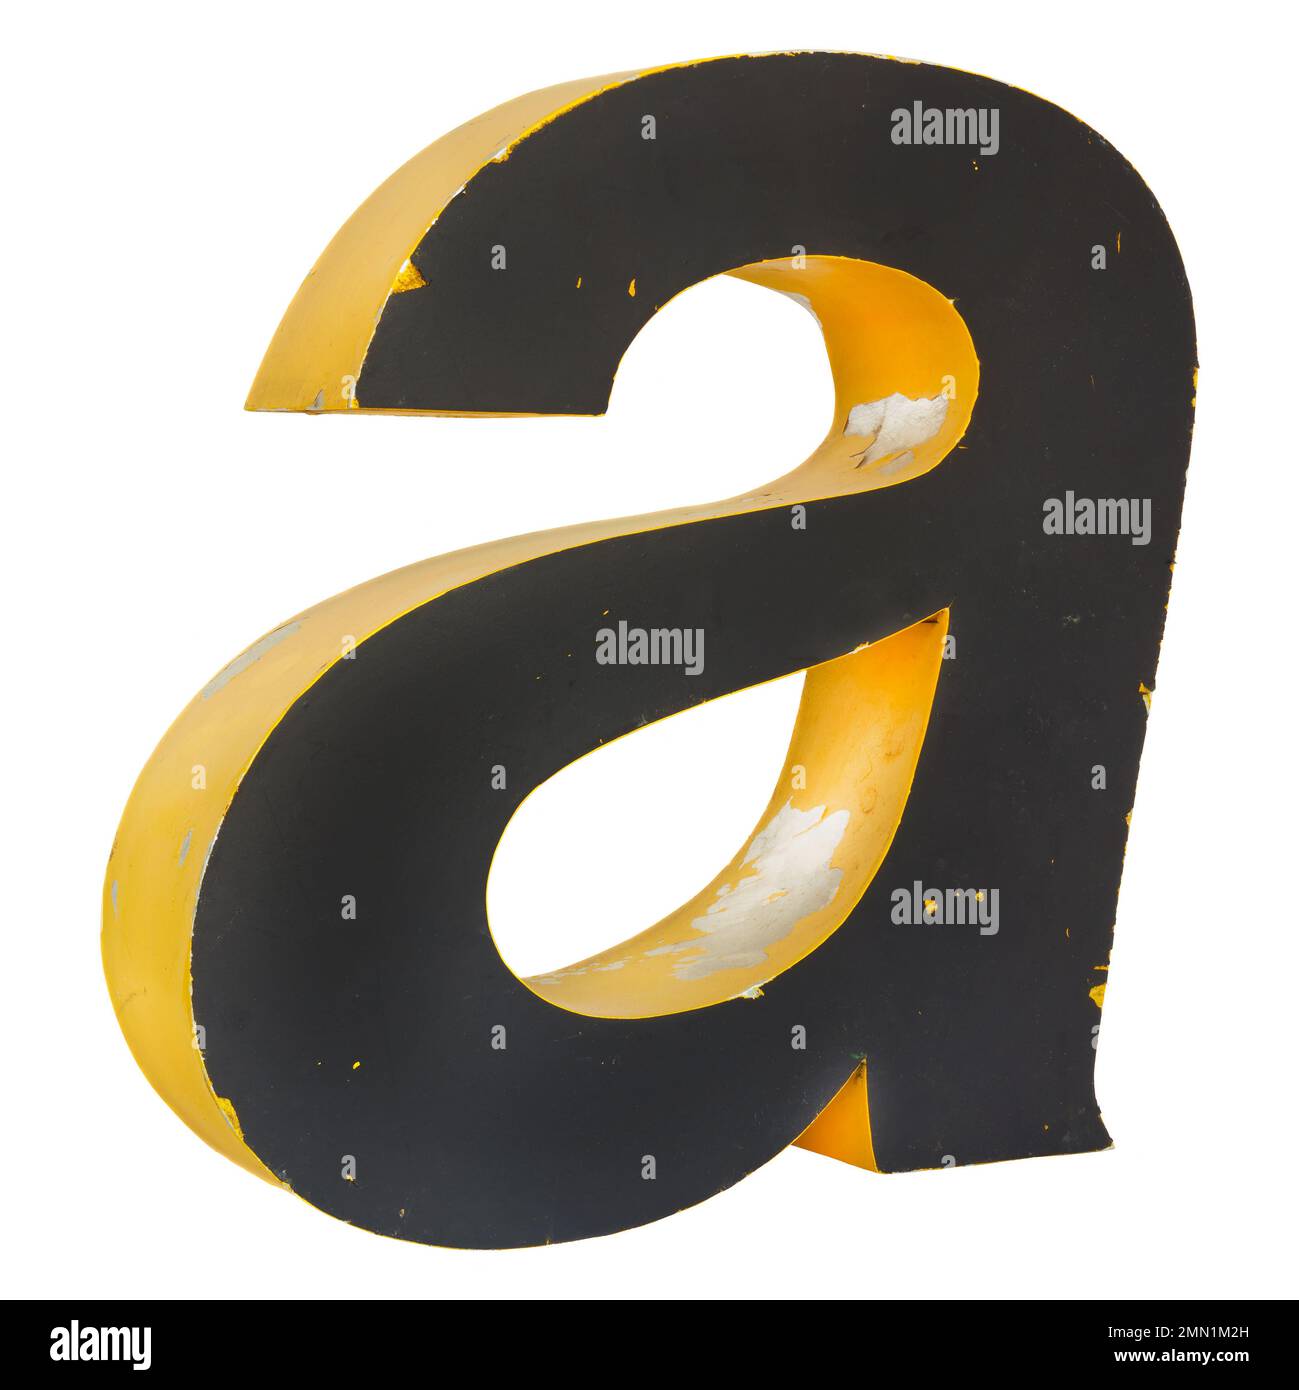 3d Heavy Metal Alphabet Font Metal Effect Letters And Numbers